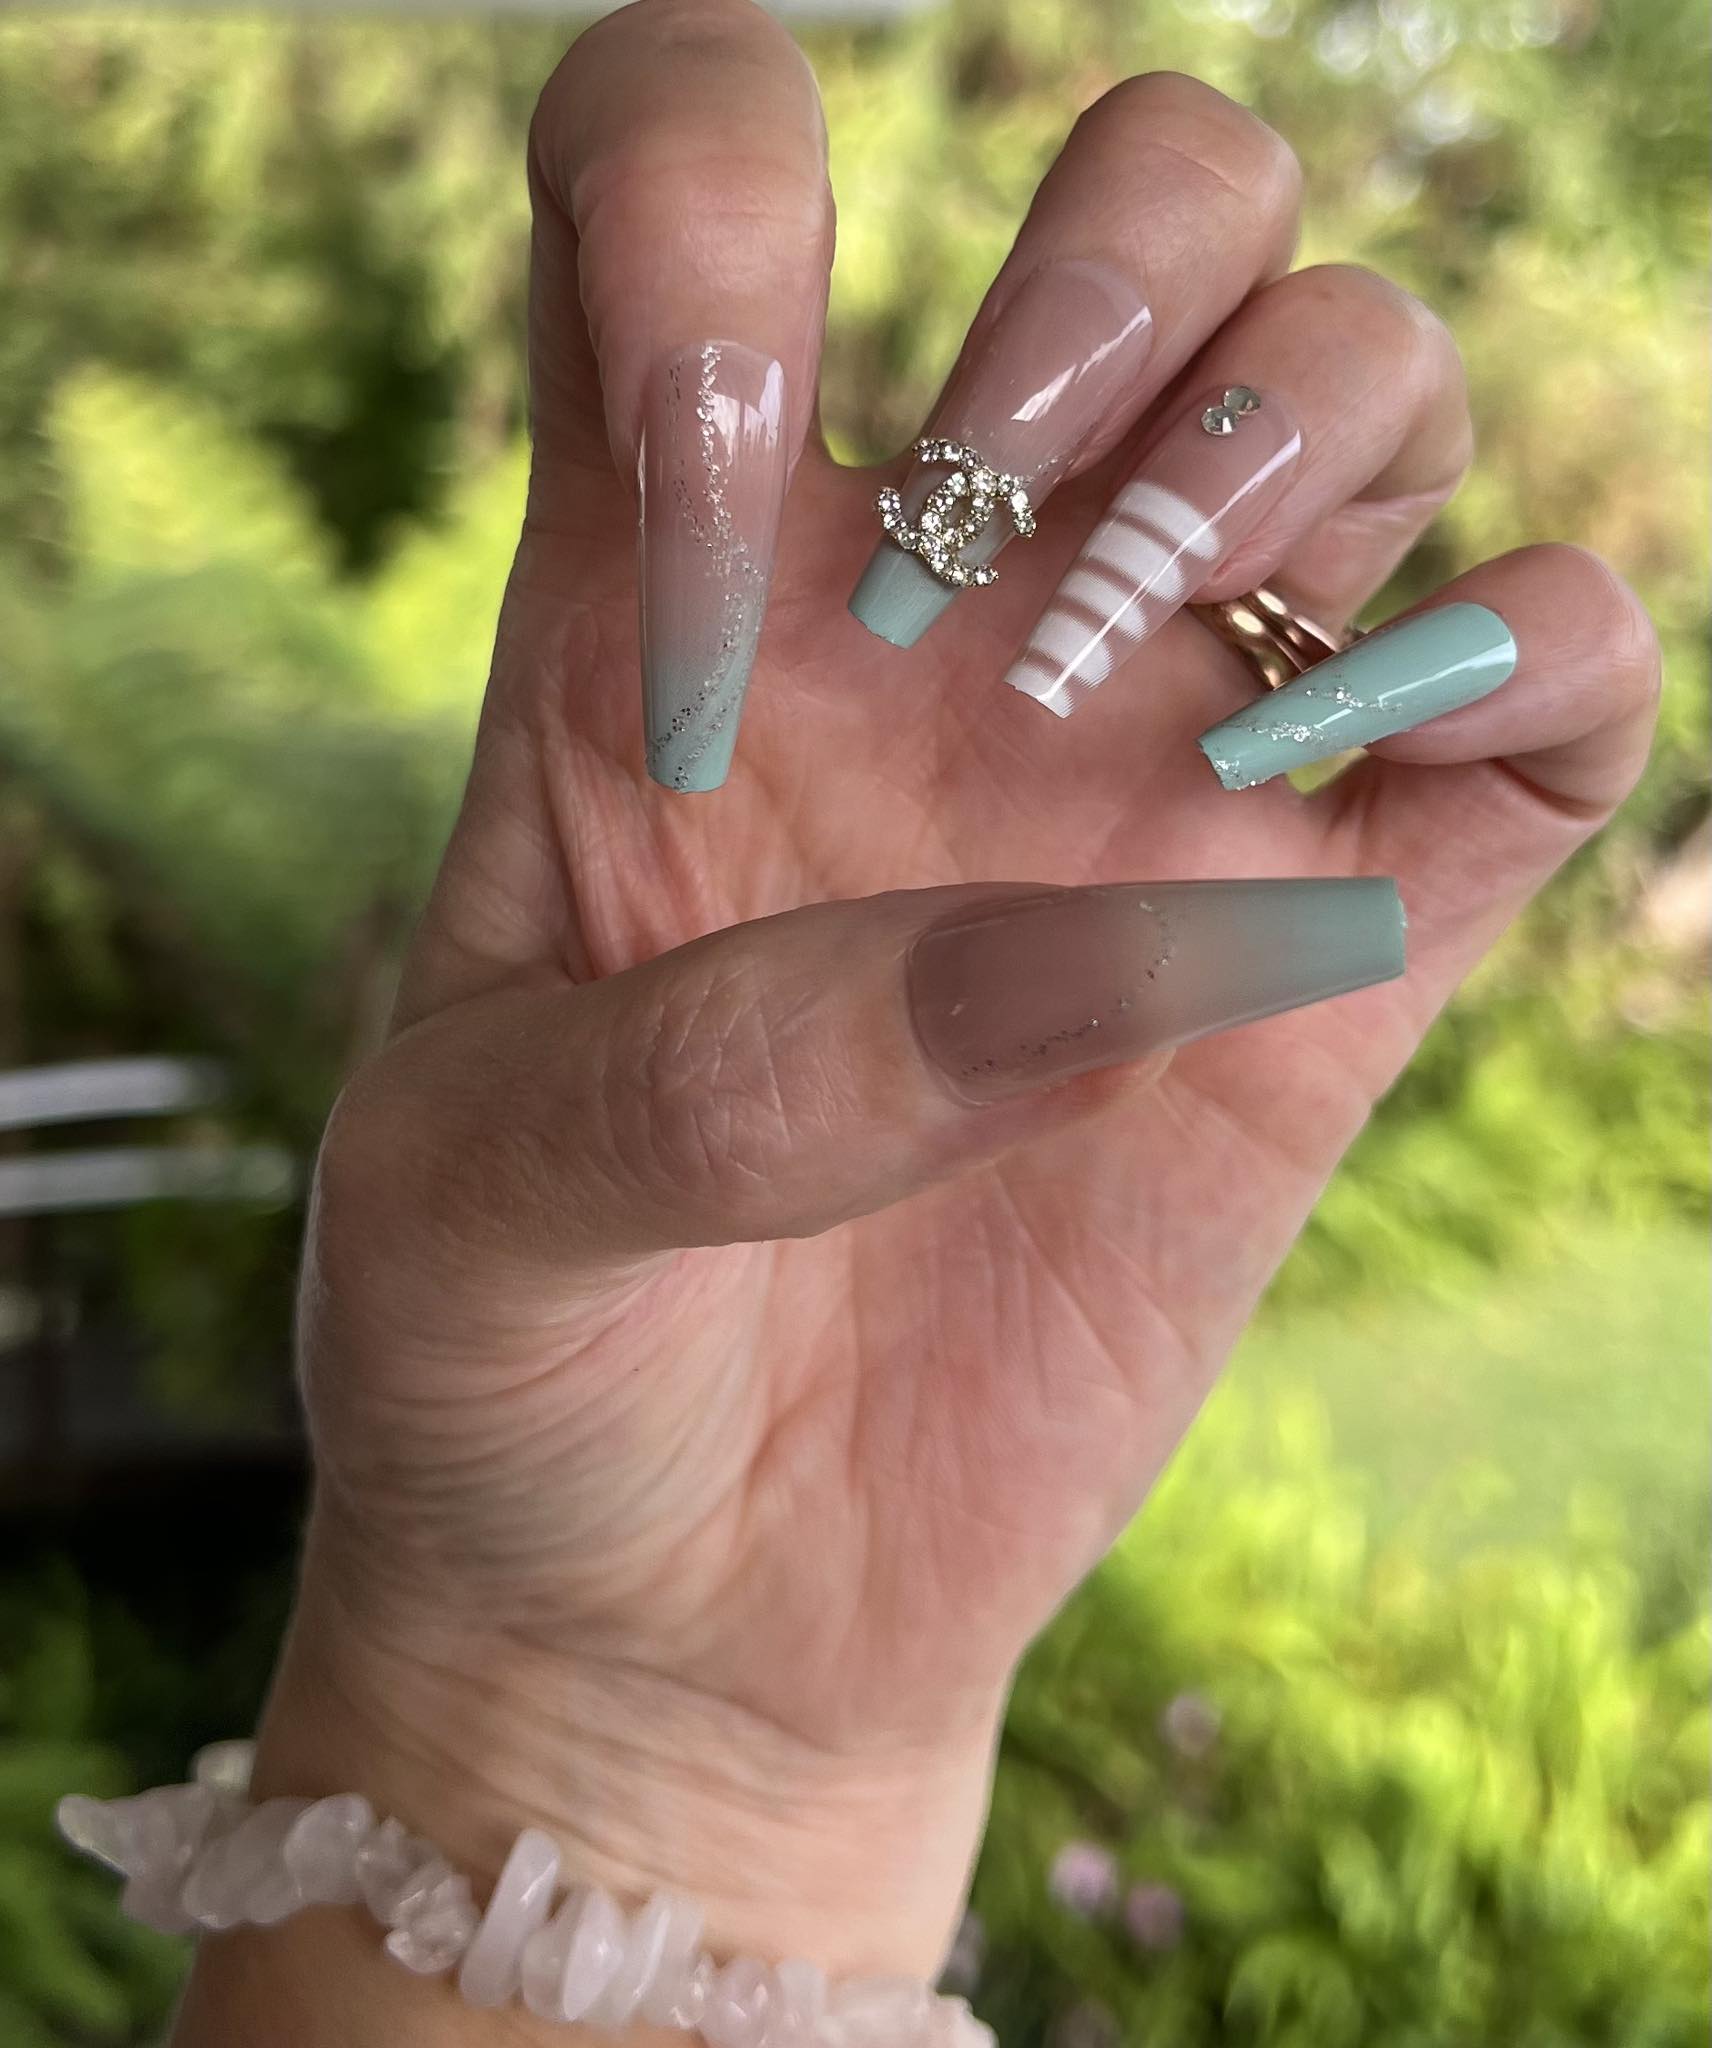 Long Coffin Press on Nails. Aqua, White & Silver with Jewels. Durable Acrylic Press on Nails. Easy and quick to apply. Great for those special occasions, parties or add an edge to any outfit. Gorgeous, flattering and you can re-use them again and again.